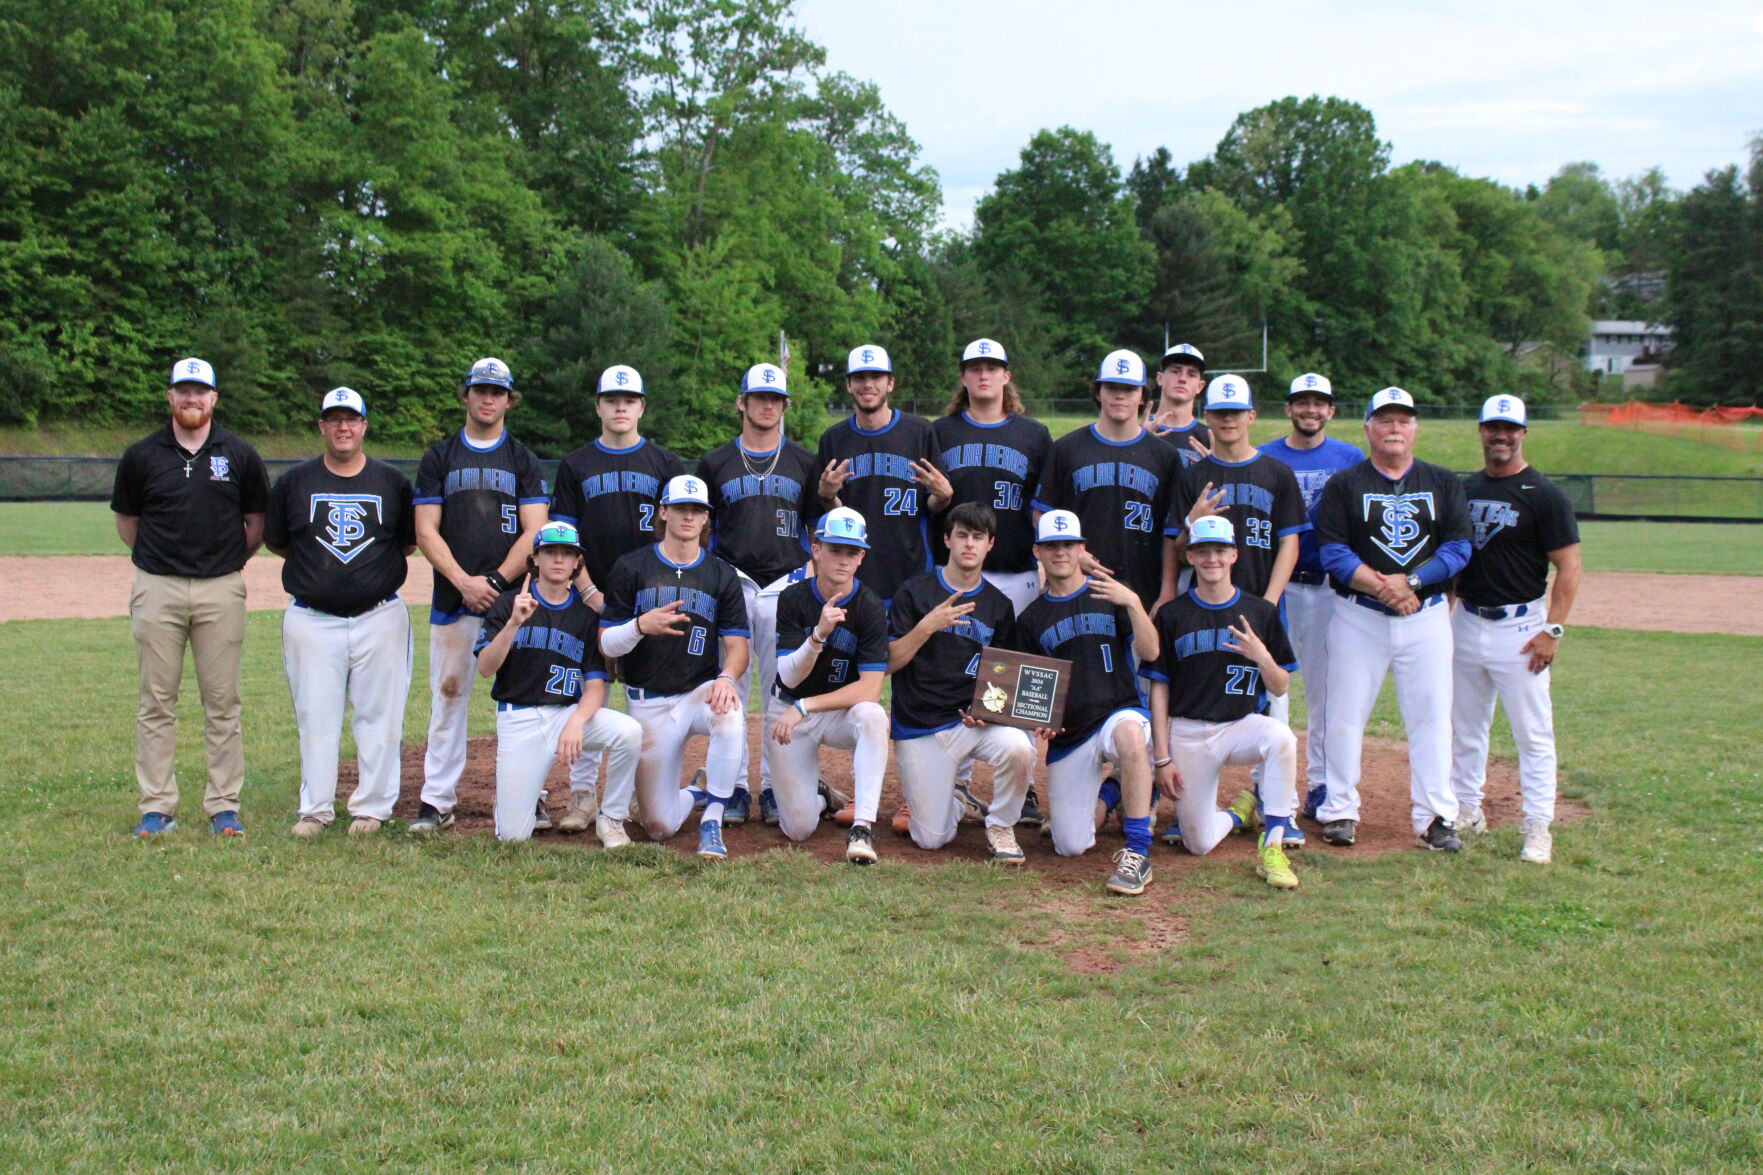 Fairmont Senior Clinches Sectional Title with 2-0 Win Over East Fairmont